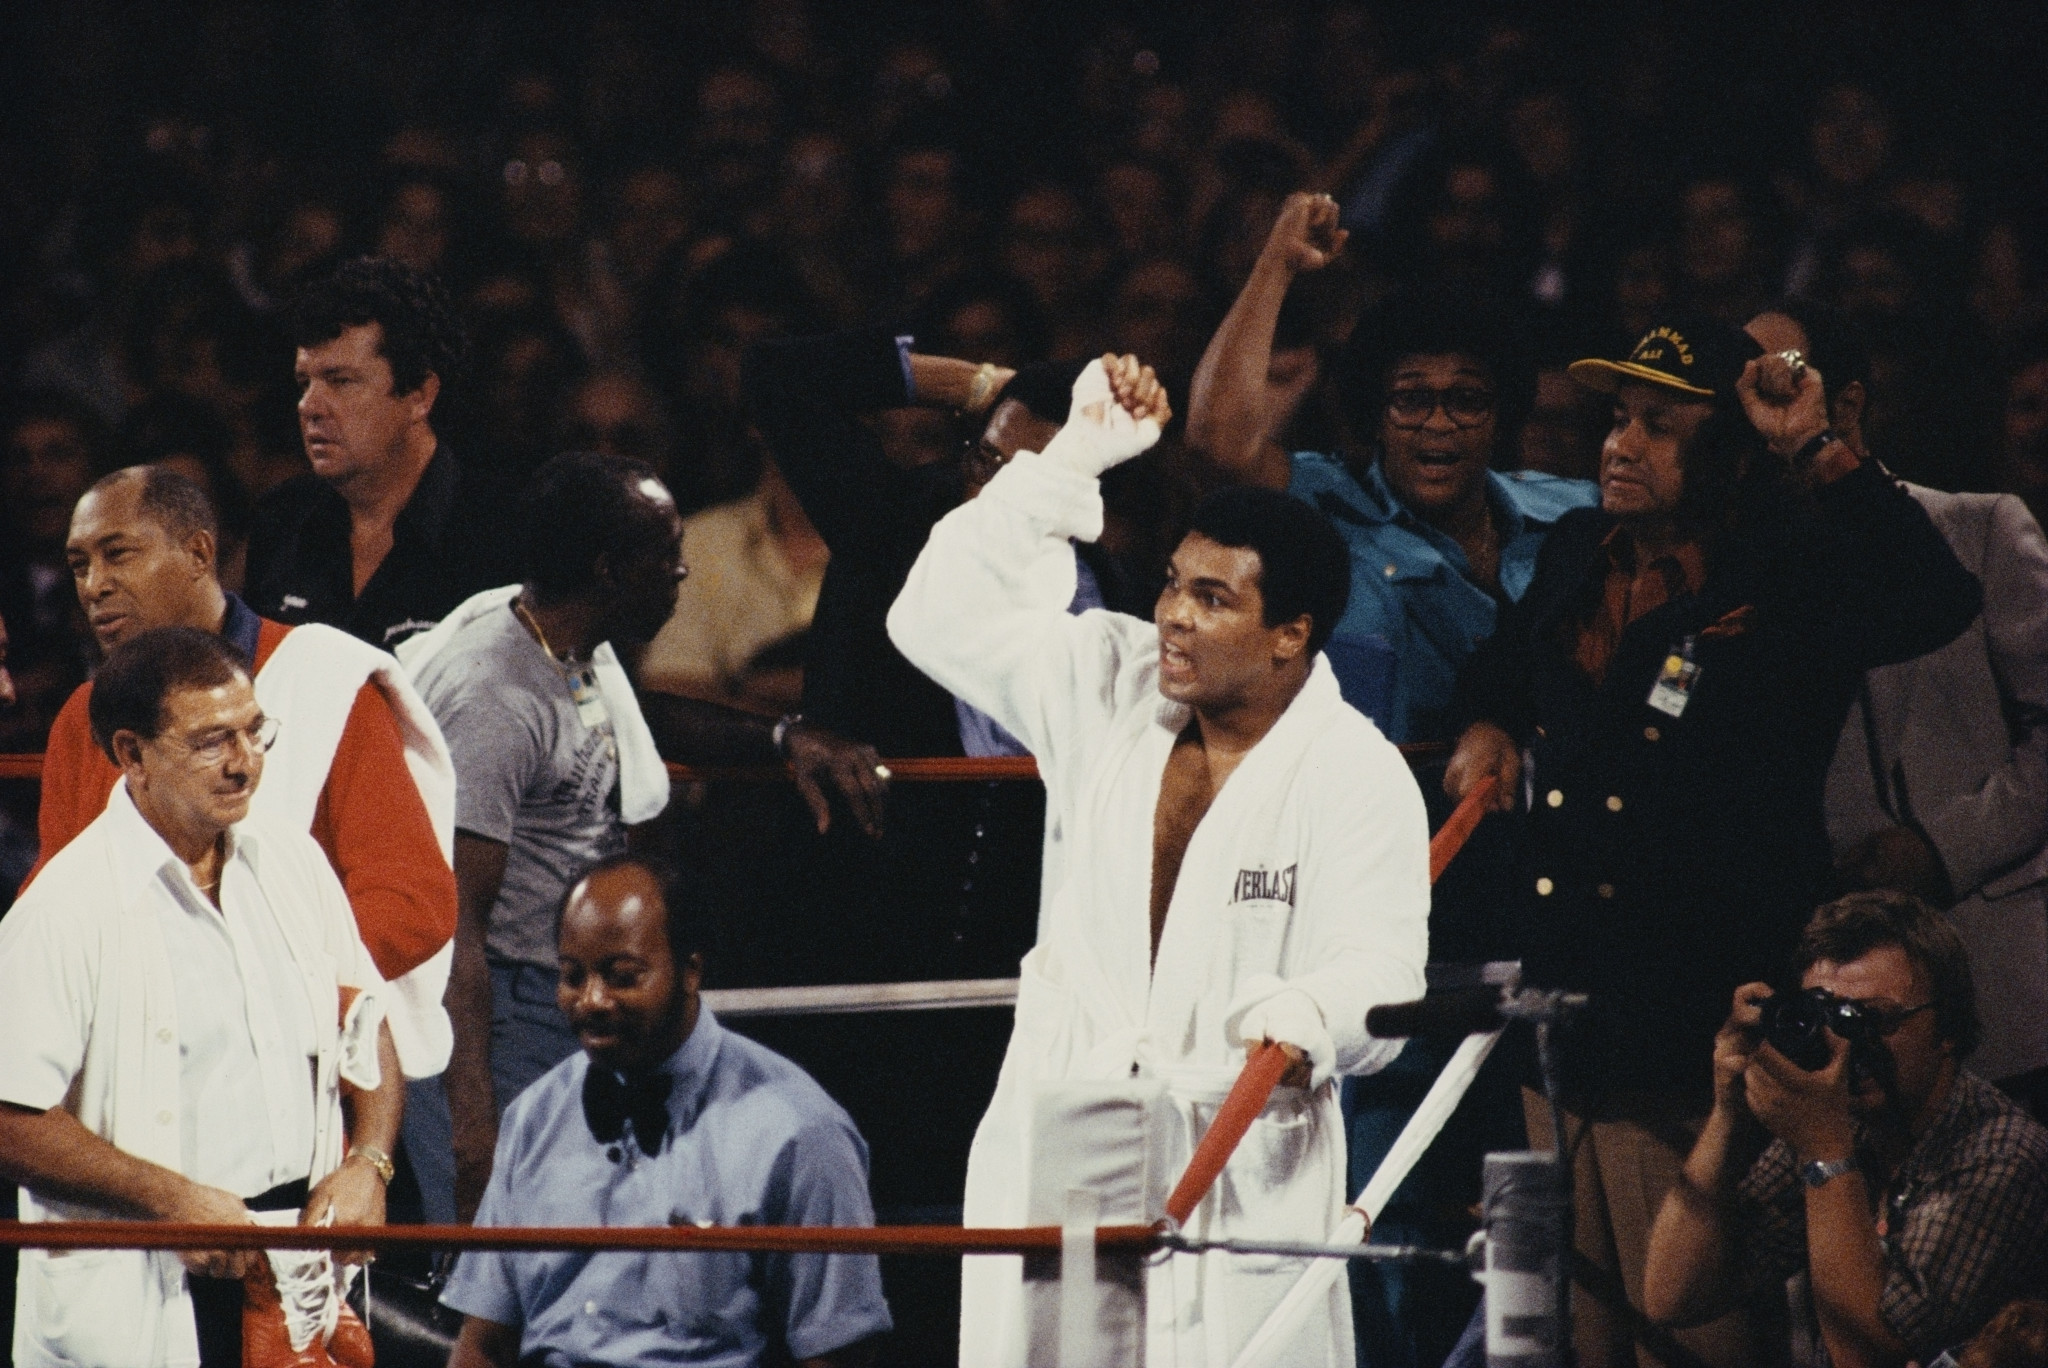 Muhammad Ali was full of bravado before his fight against Larry Holmes at Caesar’s Palace in Las Vegas in 1980 but ended up being been badly beaten ©Getty Images